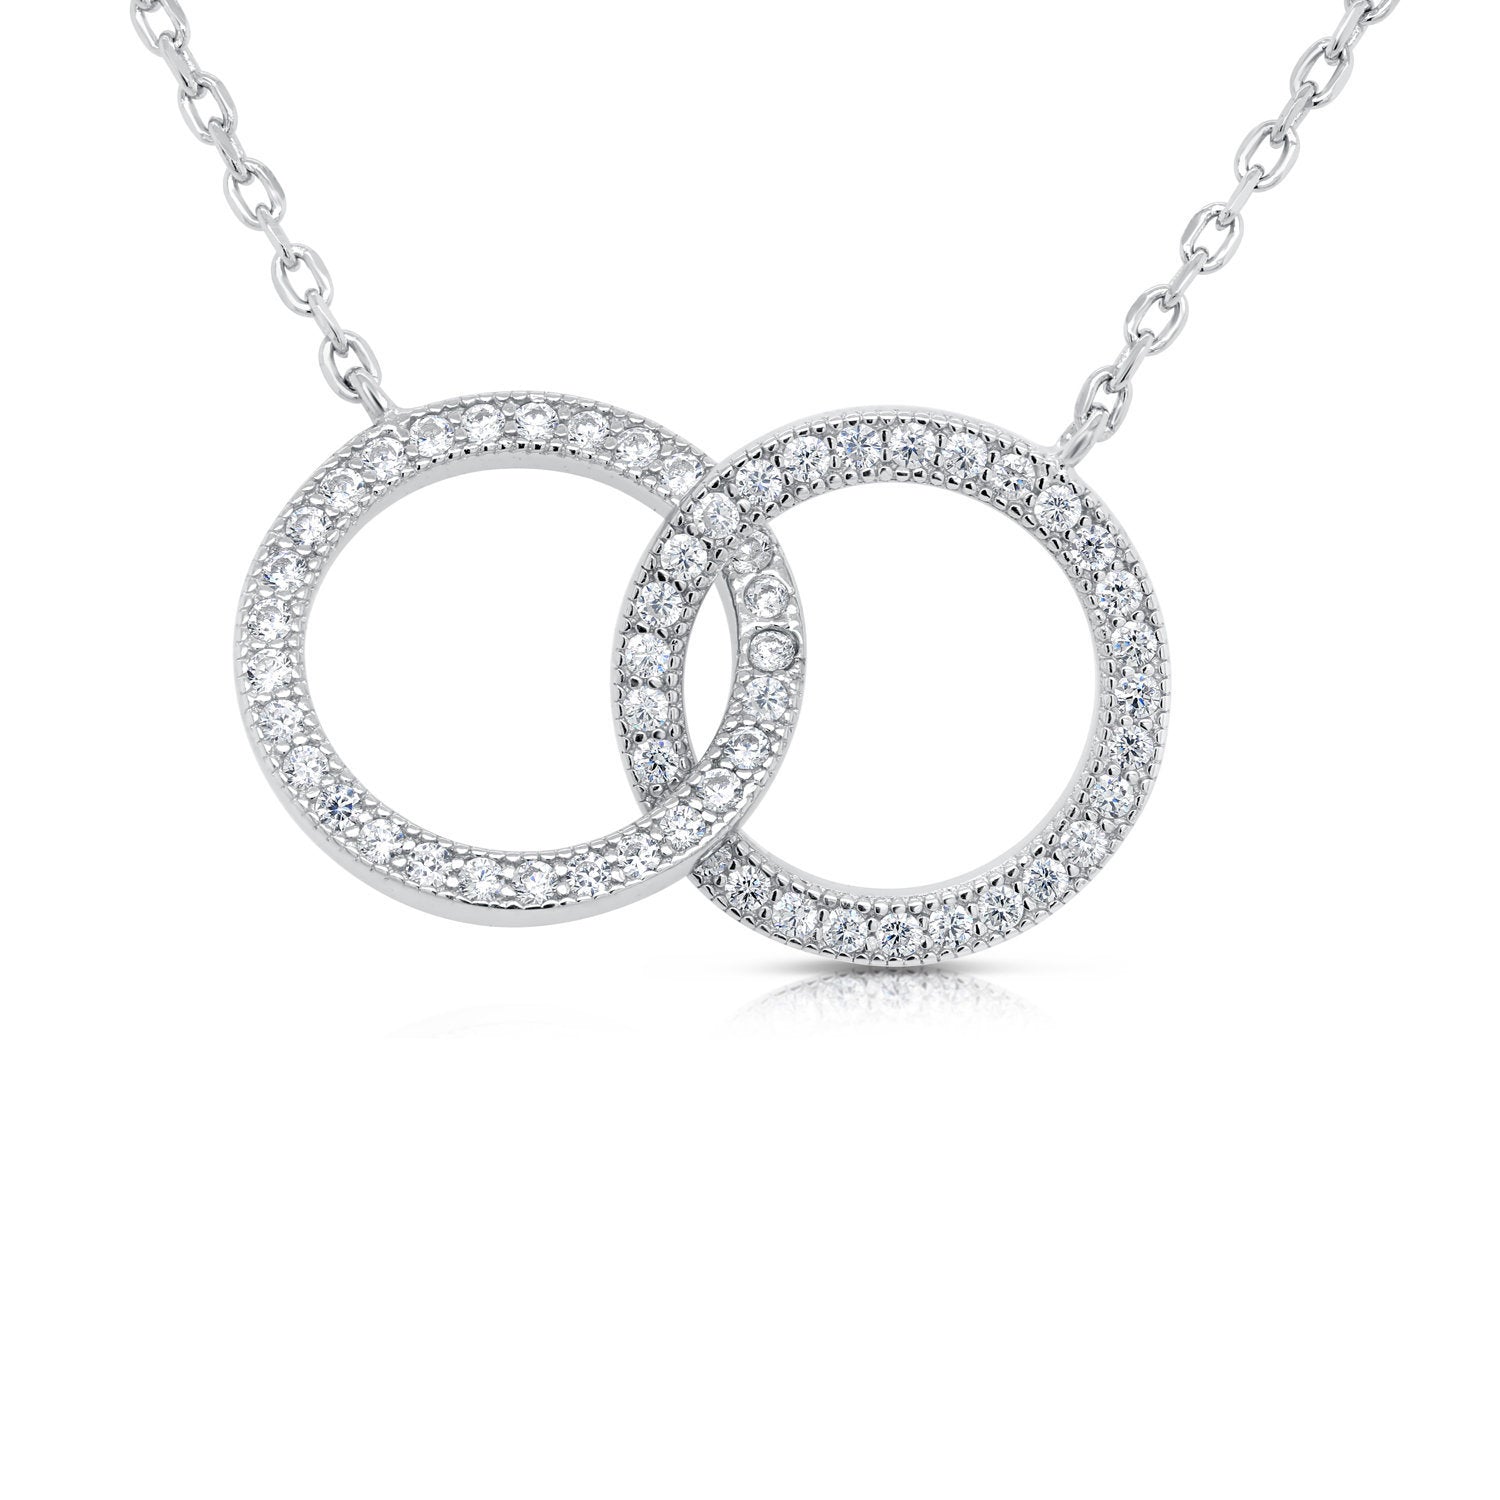 CZ Double Ring Necklace, 18 Inch in Sterling Silver